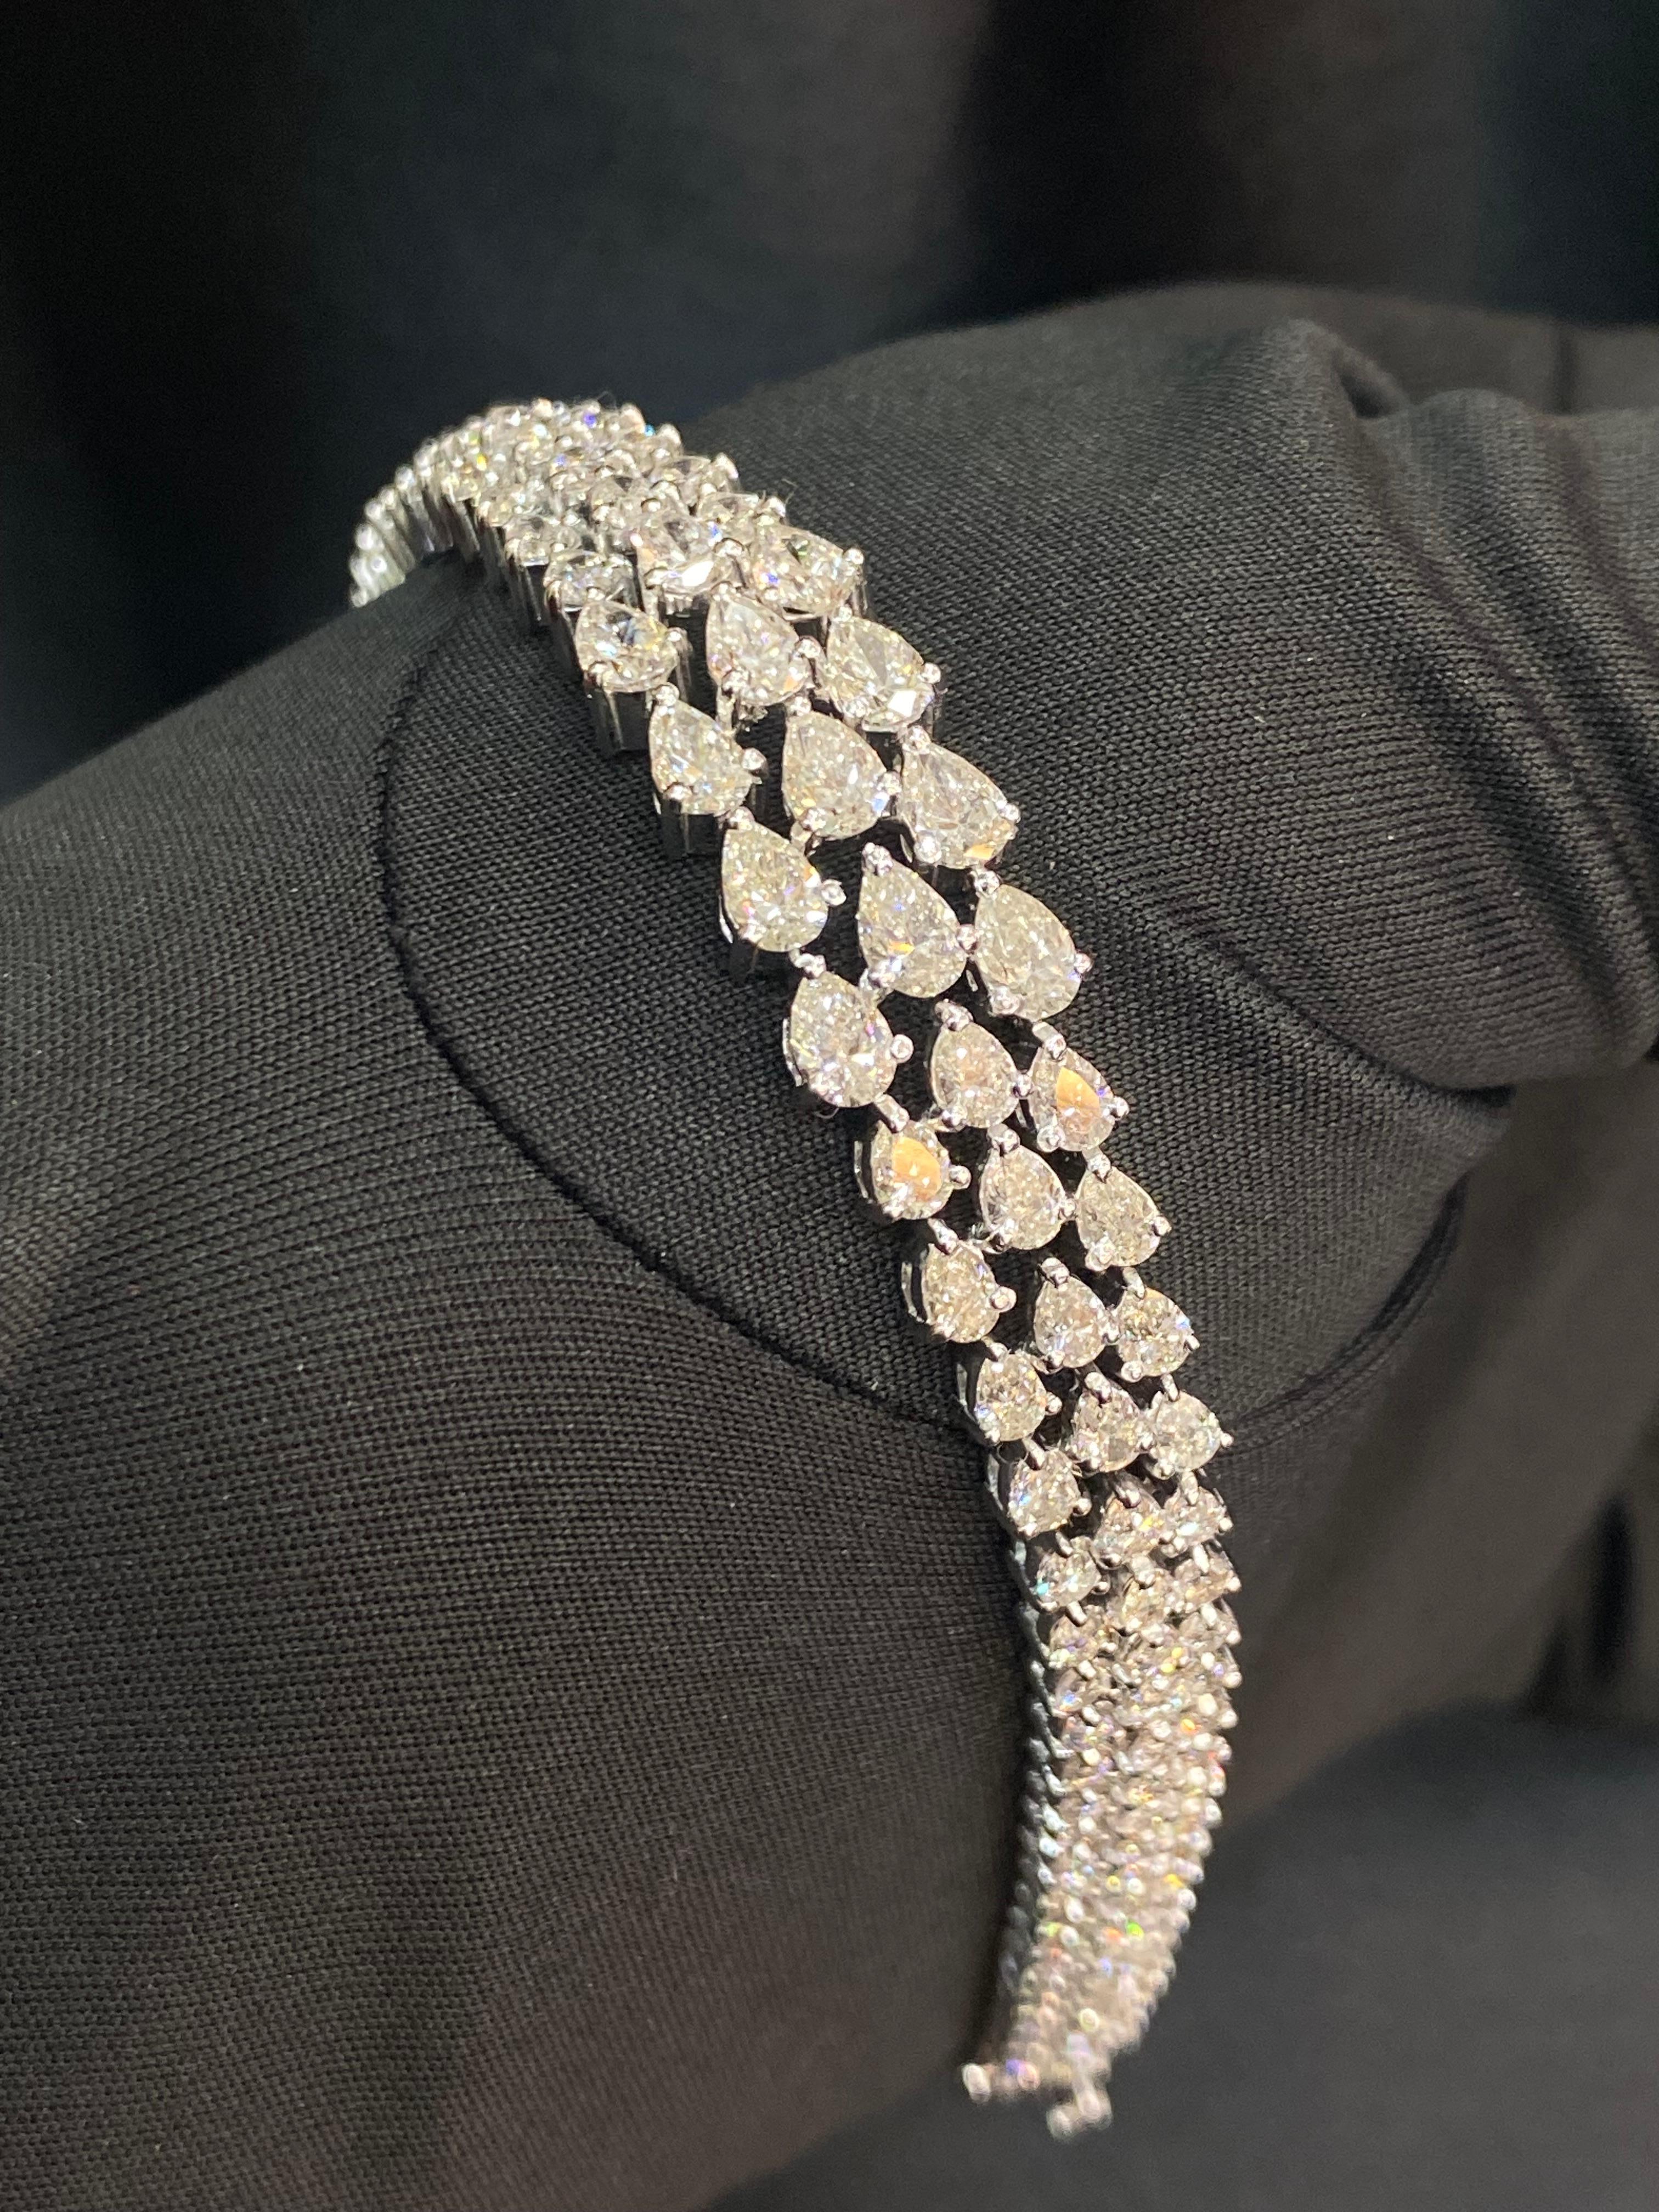 A bracelet holds a special charm, capable of igniting a million-dollar smile. Embrace the enchantment with our captivating 8.97 carat pear-shaped diamond tennis bracelet. Let this exquisite beauty bestow upon you a regal aura, making you feel truly